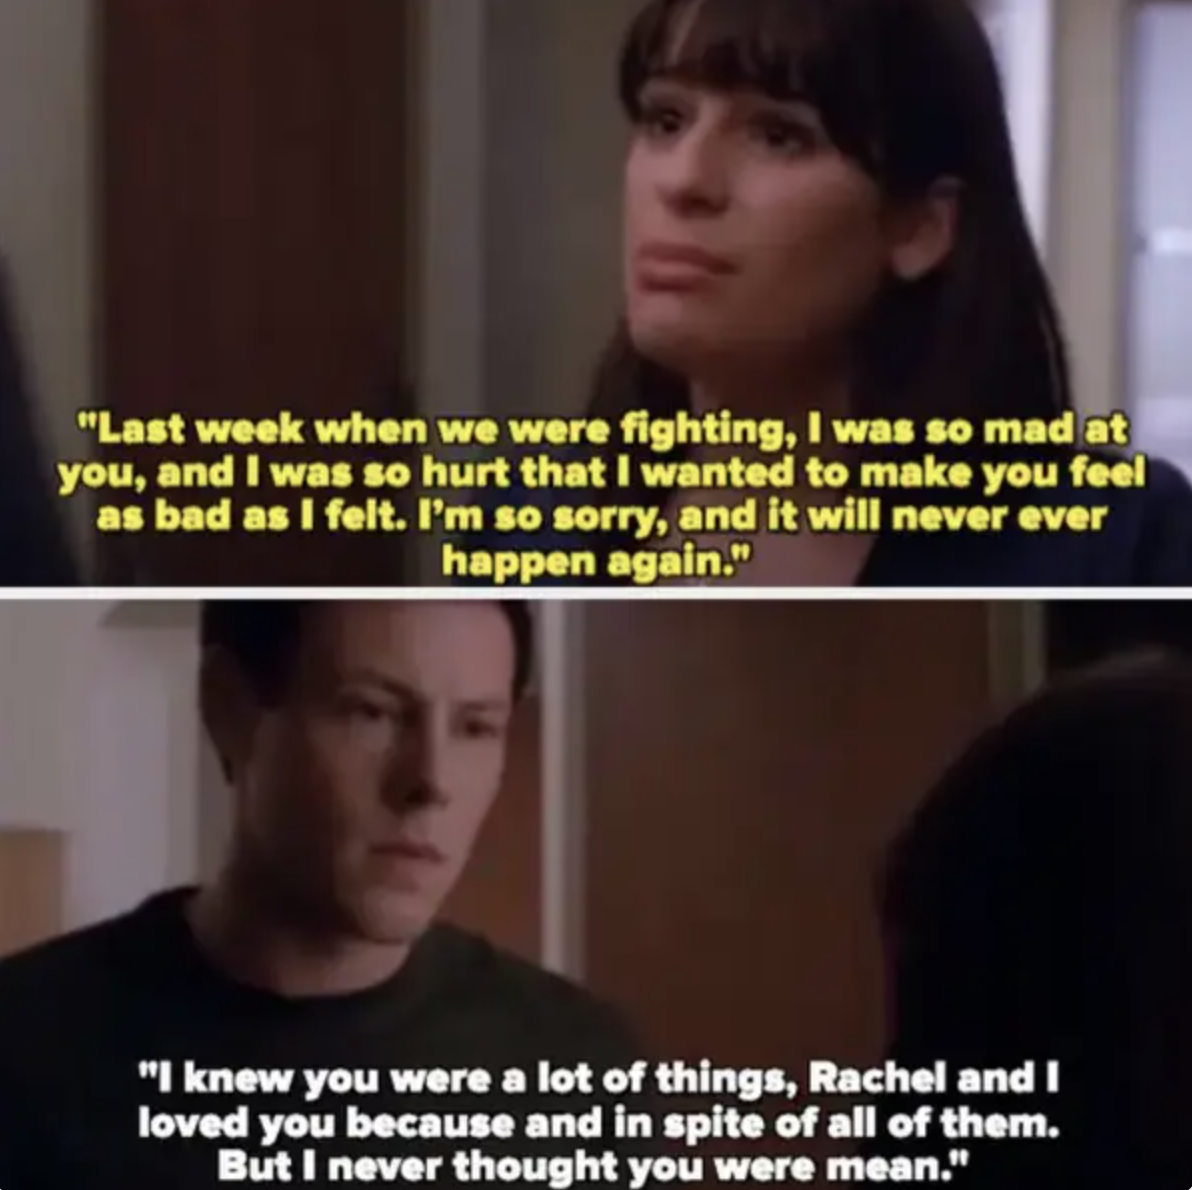 Rachel tells Finn she hooked up with Puck because she was hurt and wanted to make Finn feel as bad as she felt, Finn says he &quot;knew Rachel was a lot of things but he never thought she was mean&quot;